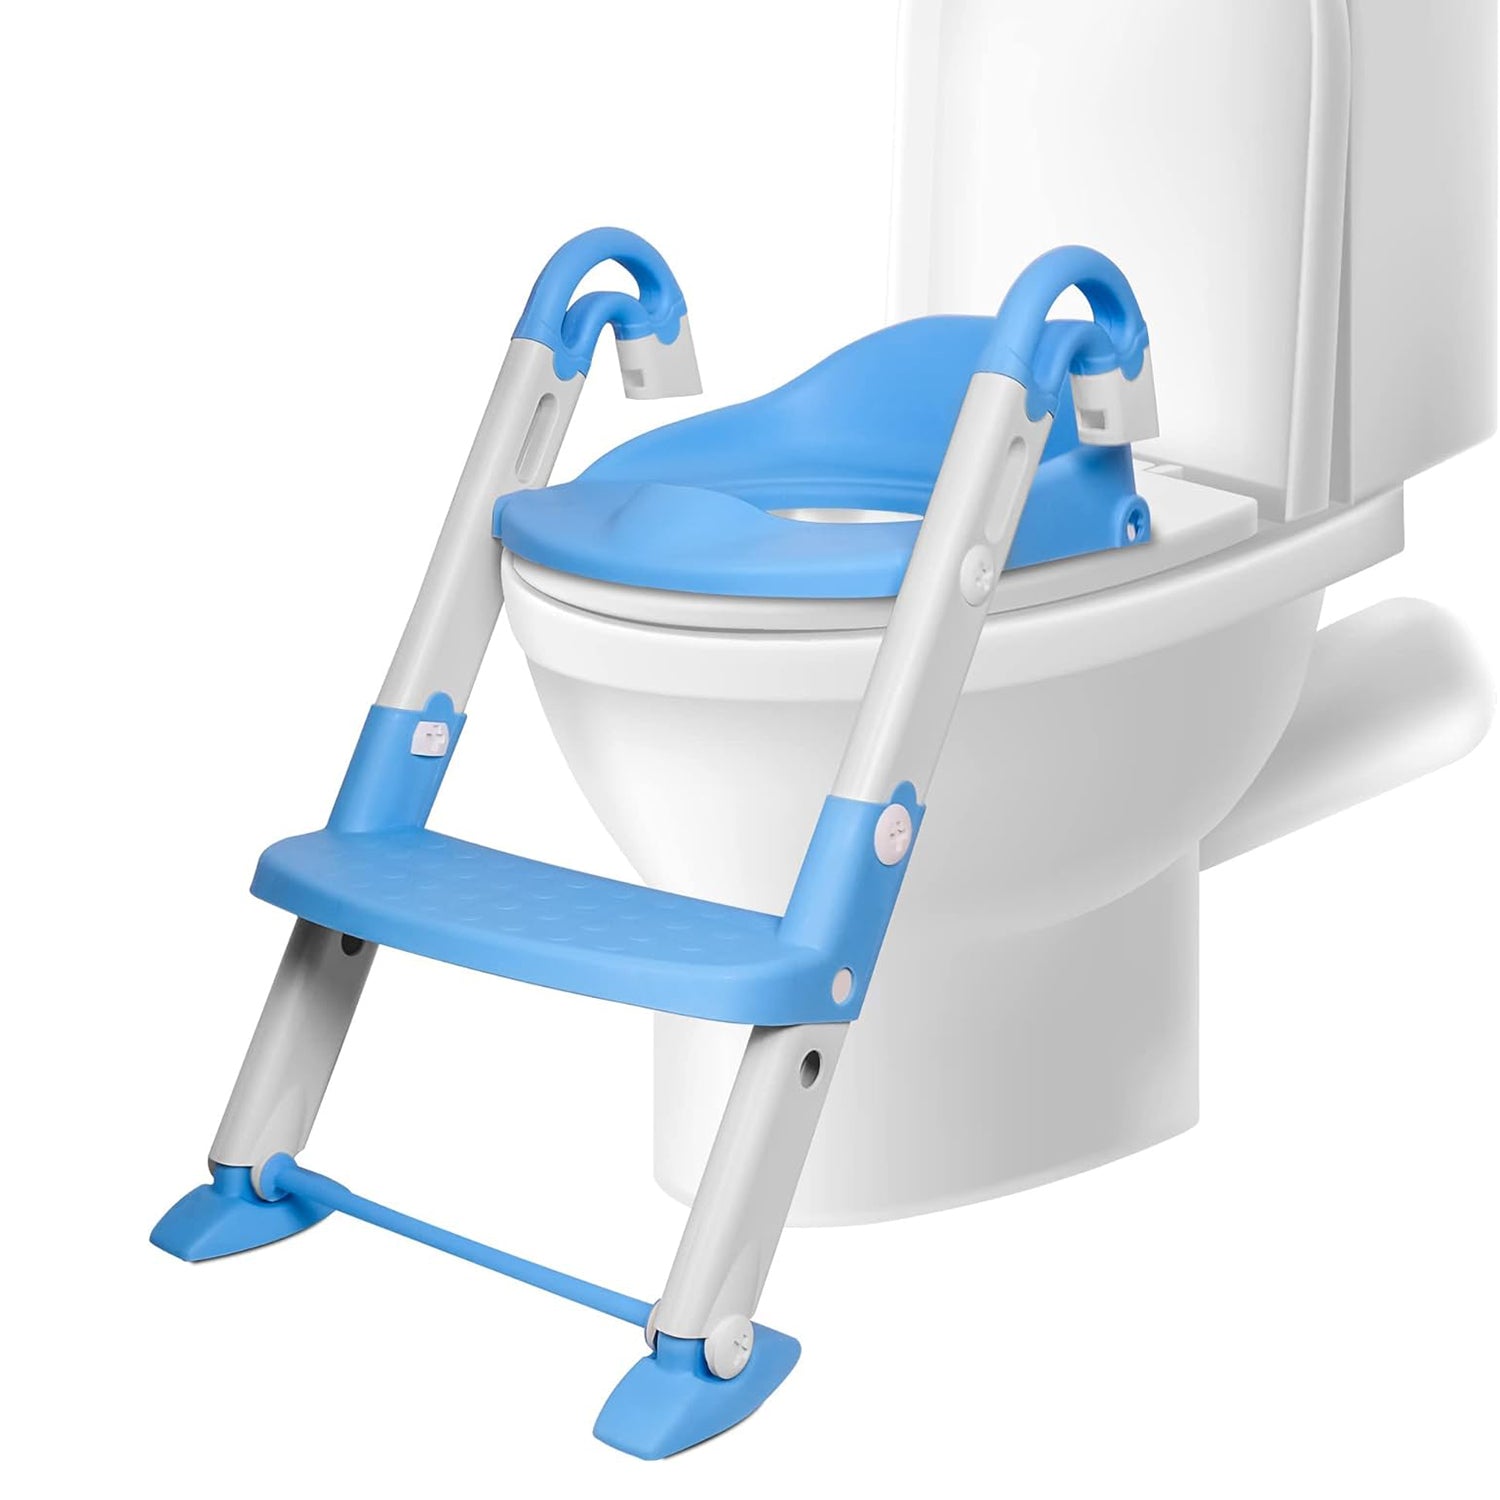 Kid's 3 in 1 Potty Training Toilet Seat with Adjustable Ladder, Blue